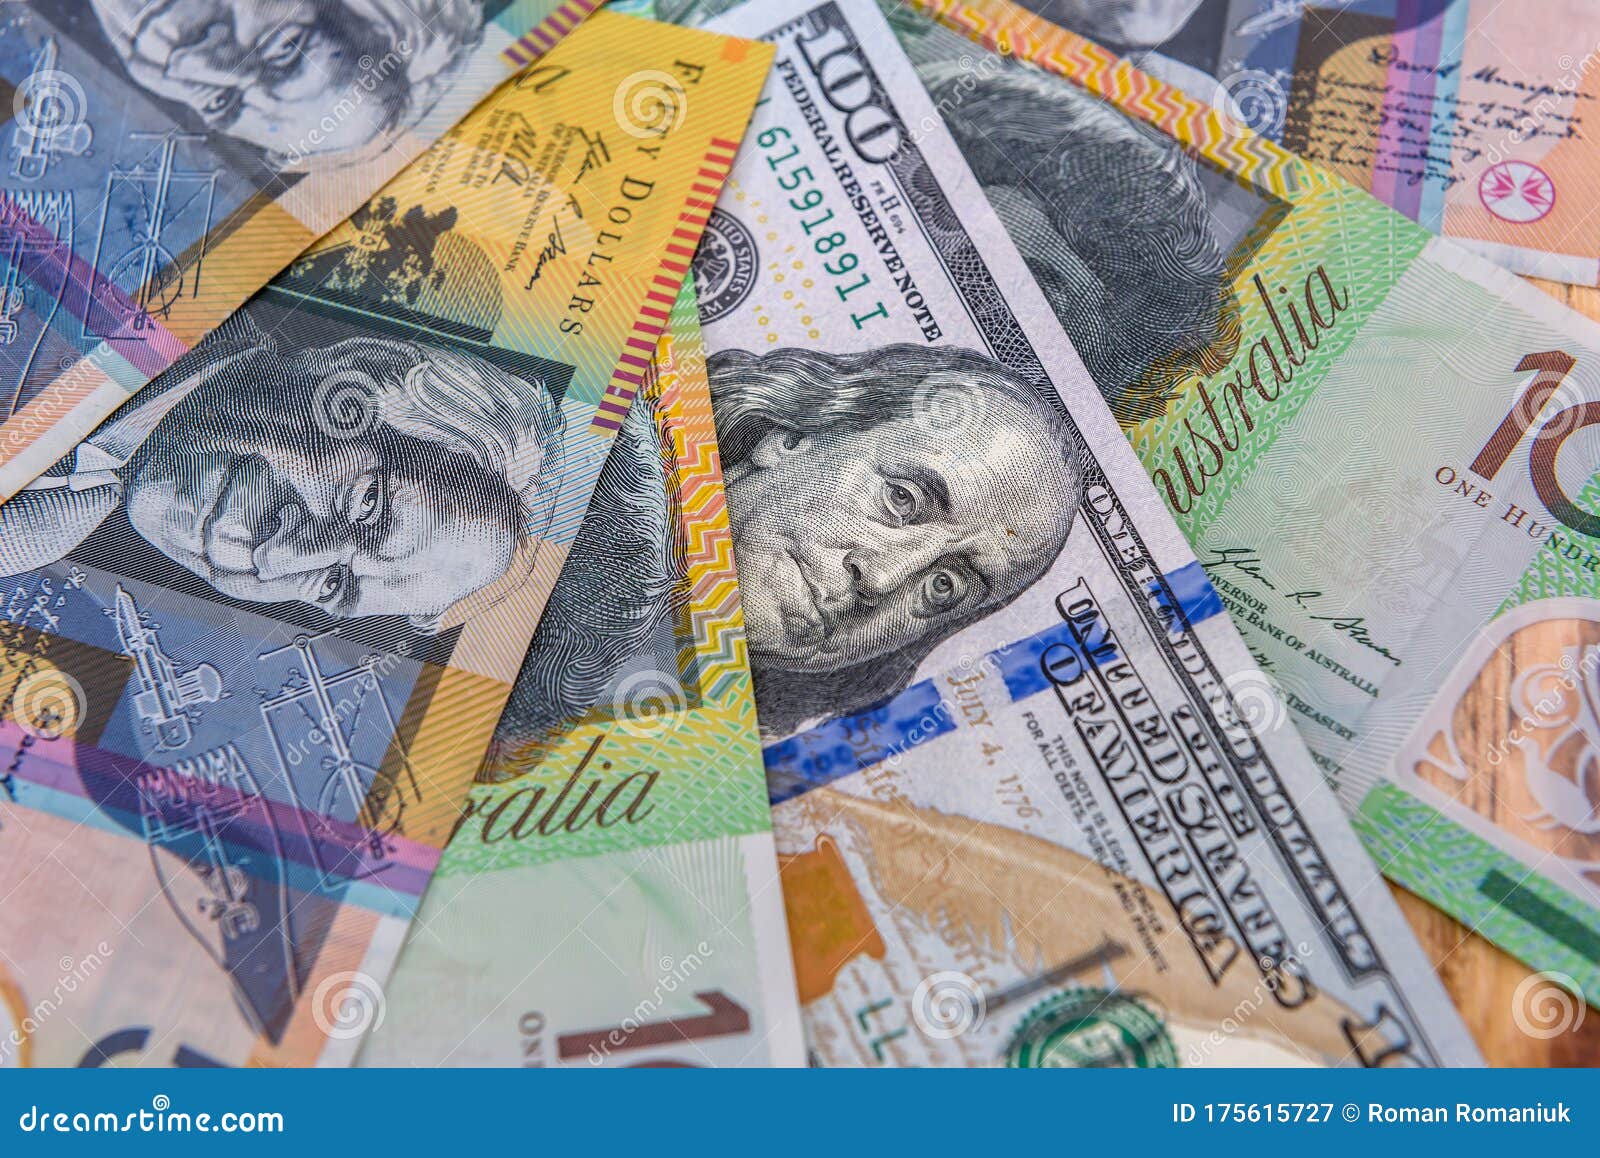 American Dollar Banknote and Colorful Australian Dollars Stock Image Image of banking, 175615727